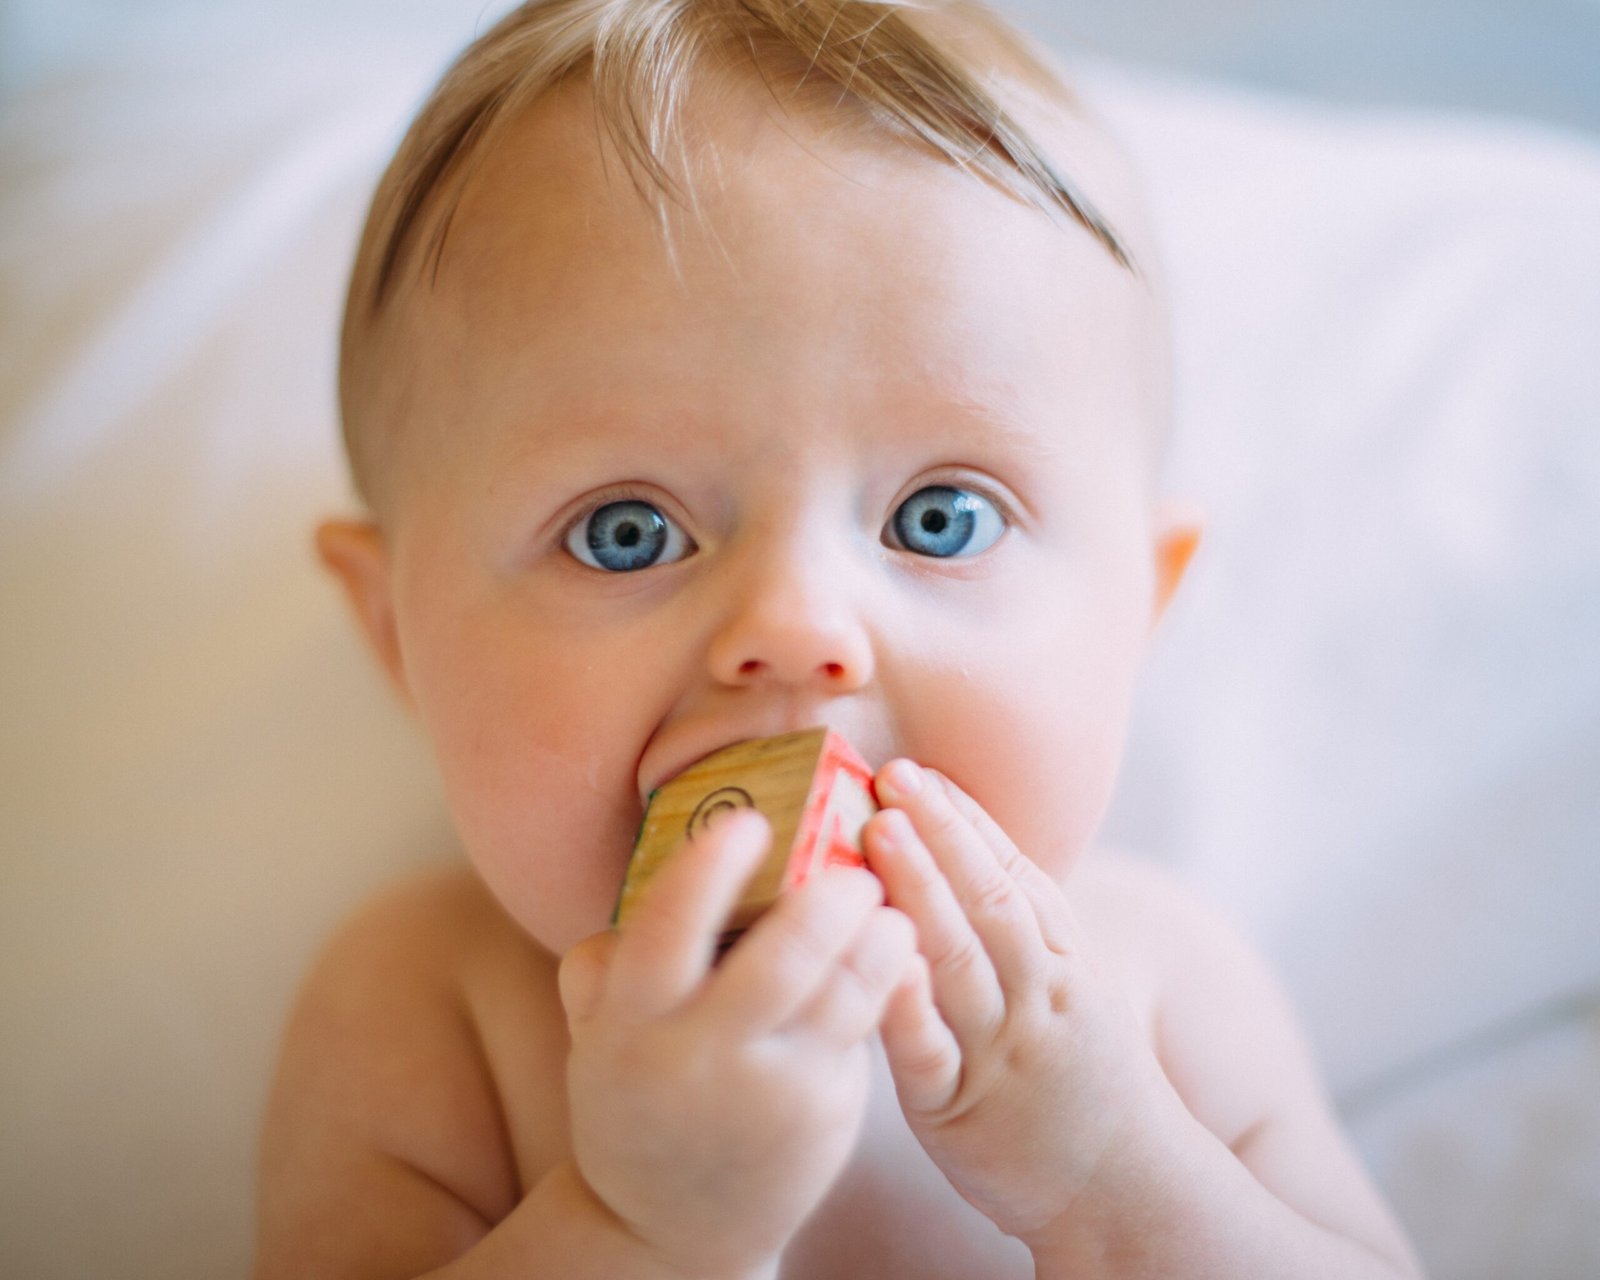 How To Disinfect Baby Toys That Go In Mouth